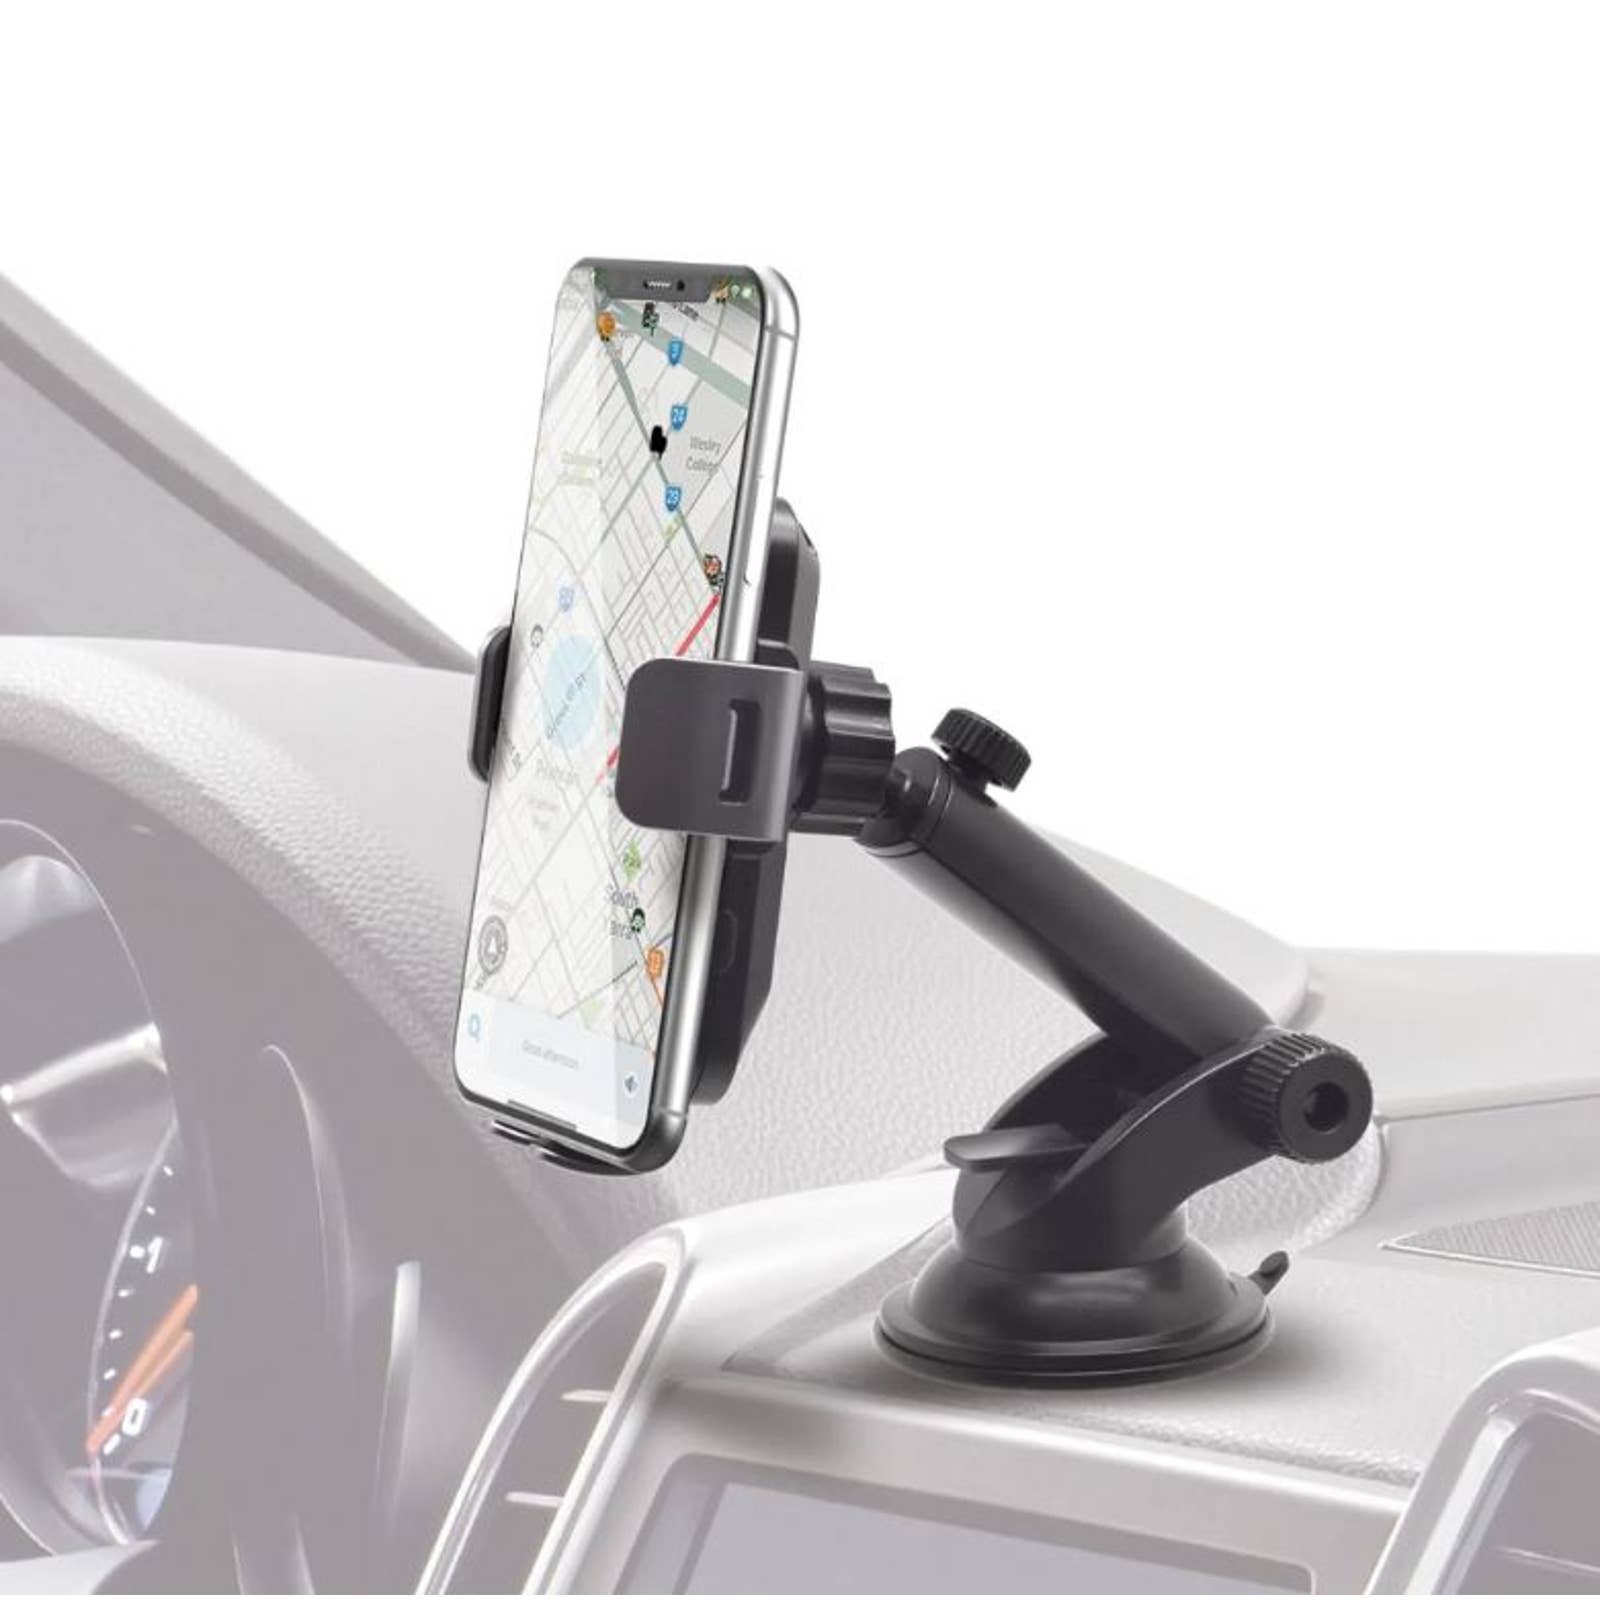 Bracketron - BT2-954-2 PwrUp Qi Automatic Dash / Window / Vent Mount for Most Cell Phones - Black